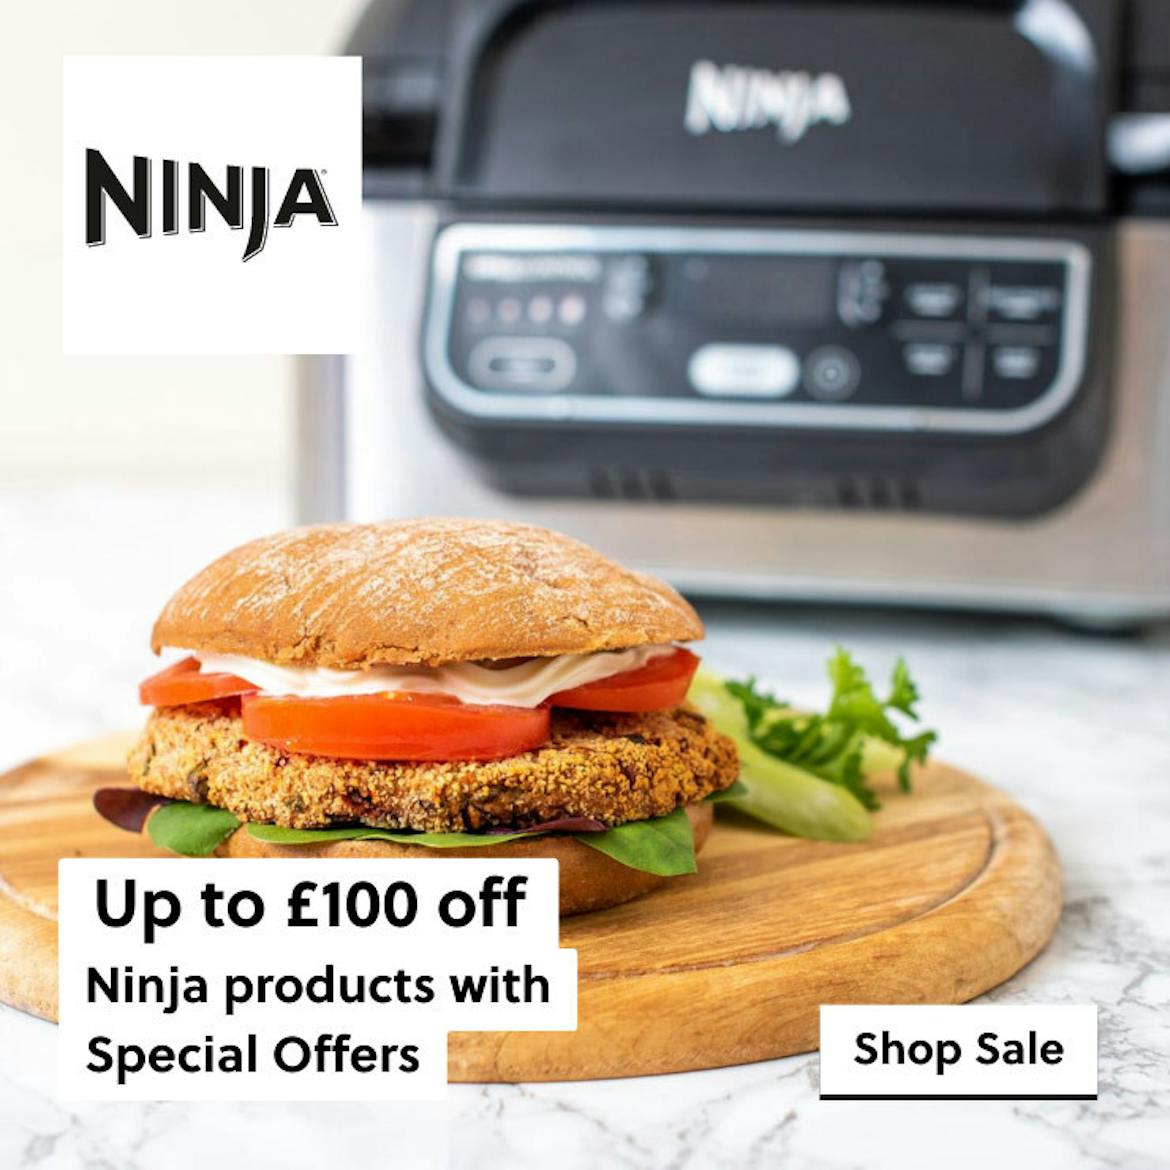 Ninja - Up to £100 off selected items